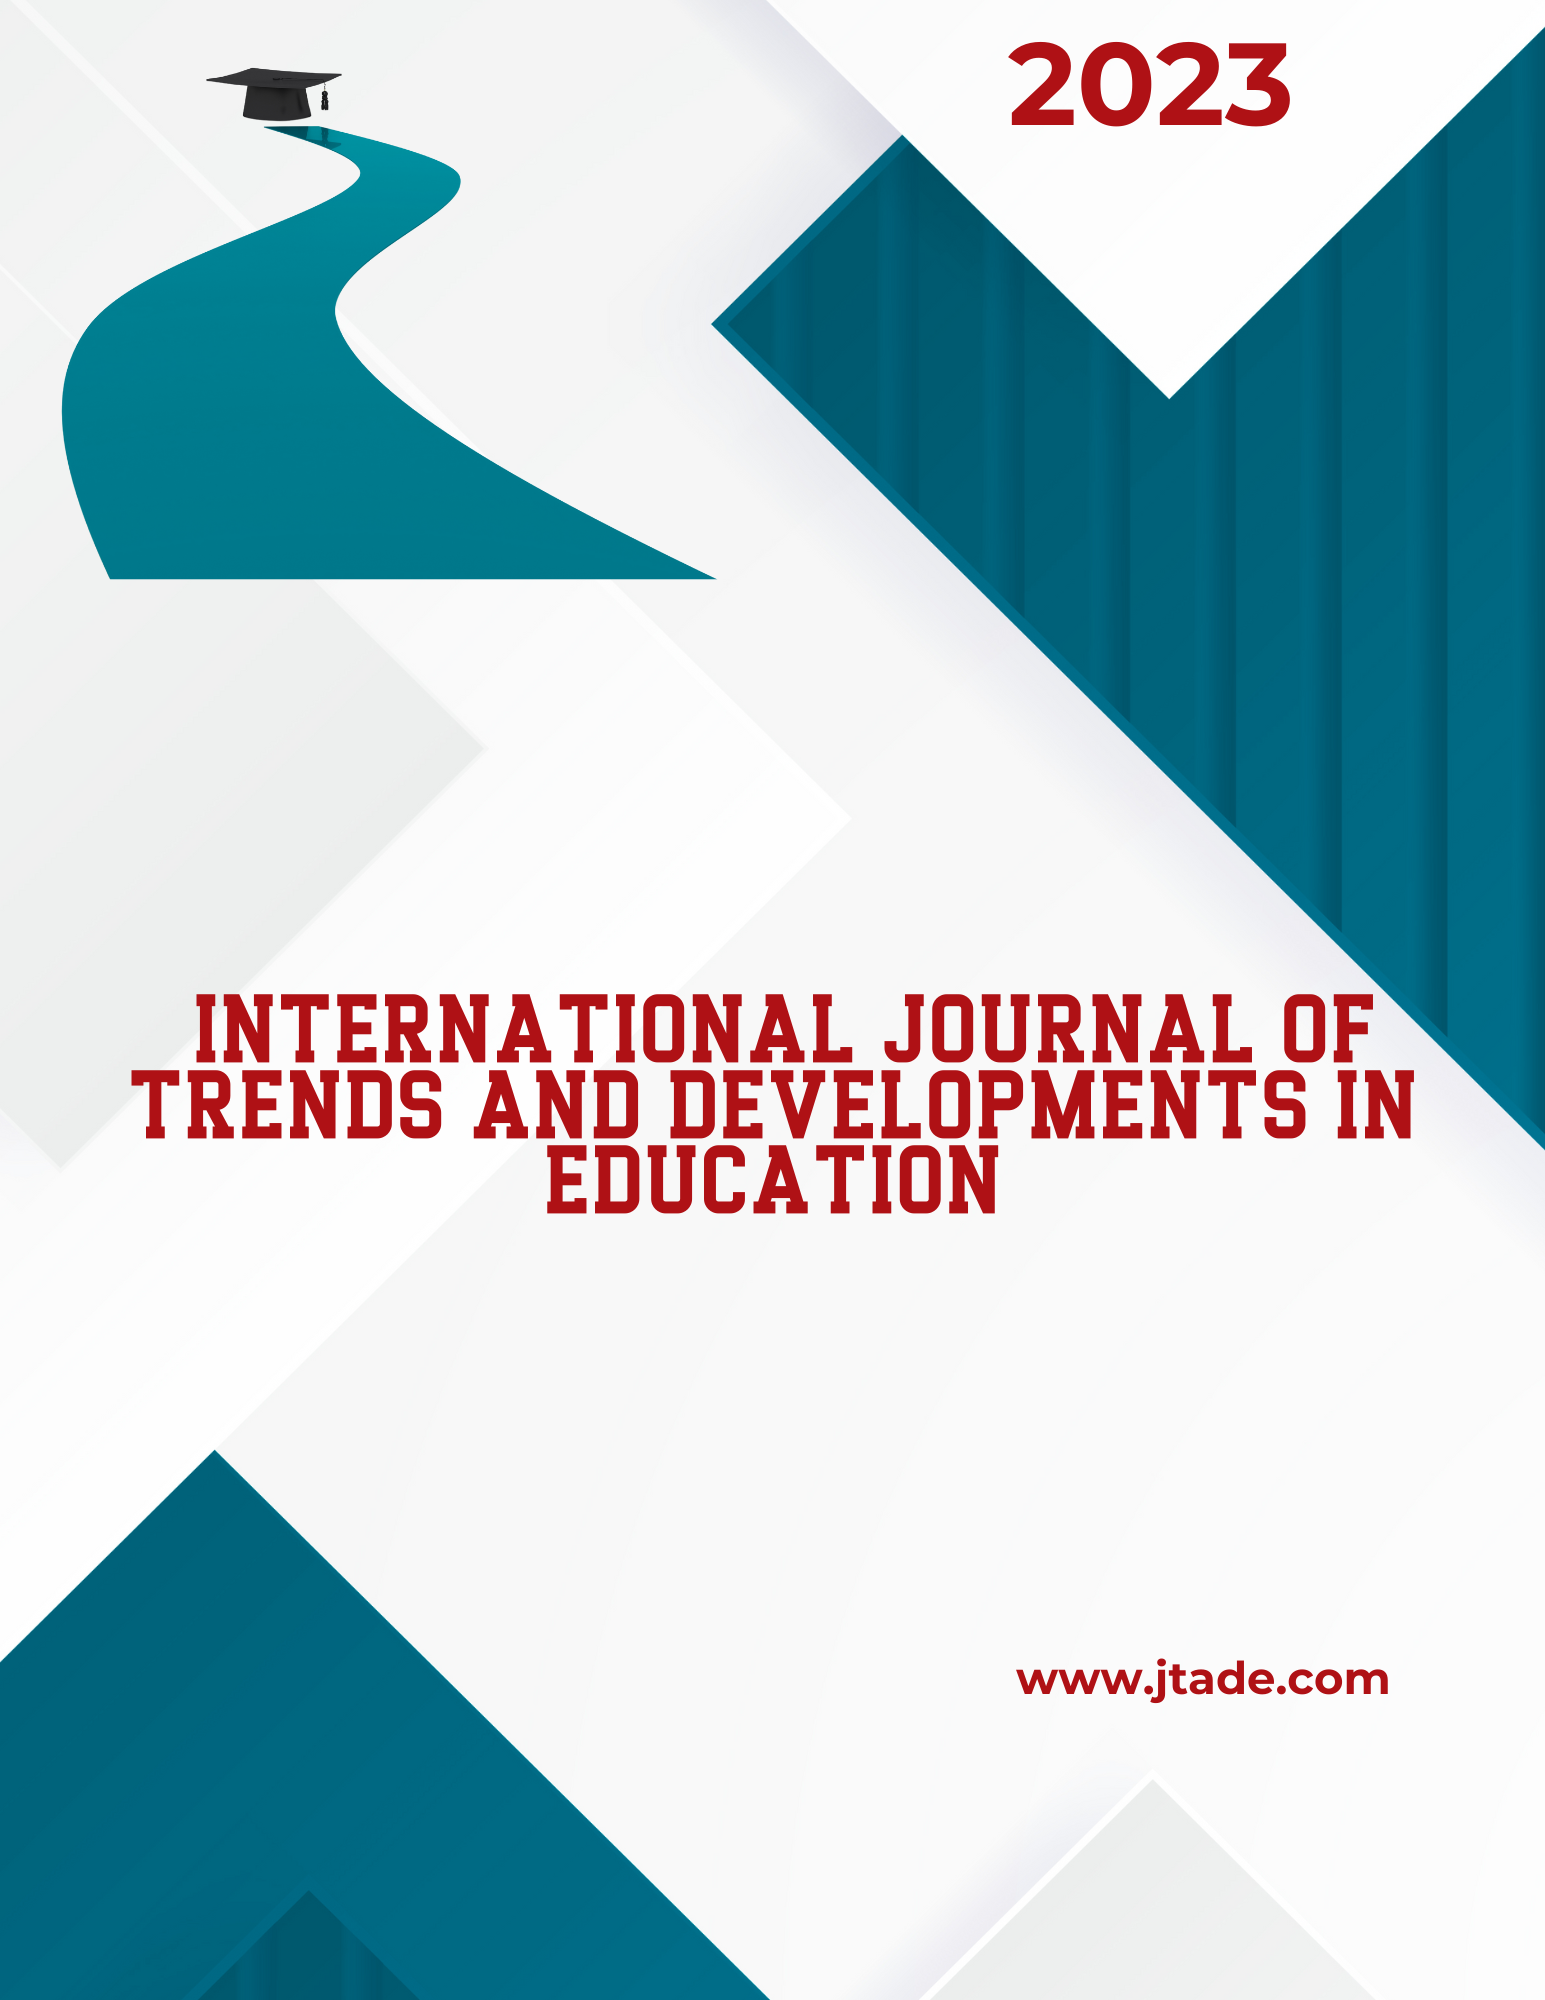 					View Vol. 3 No. 2 (2023): International Journal of Trends and Developments in Education
				